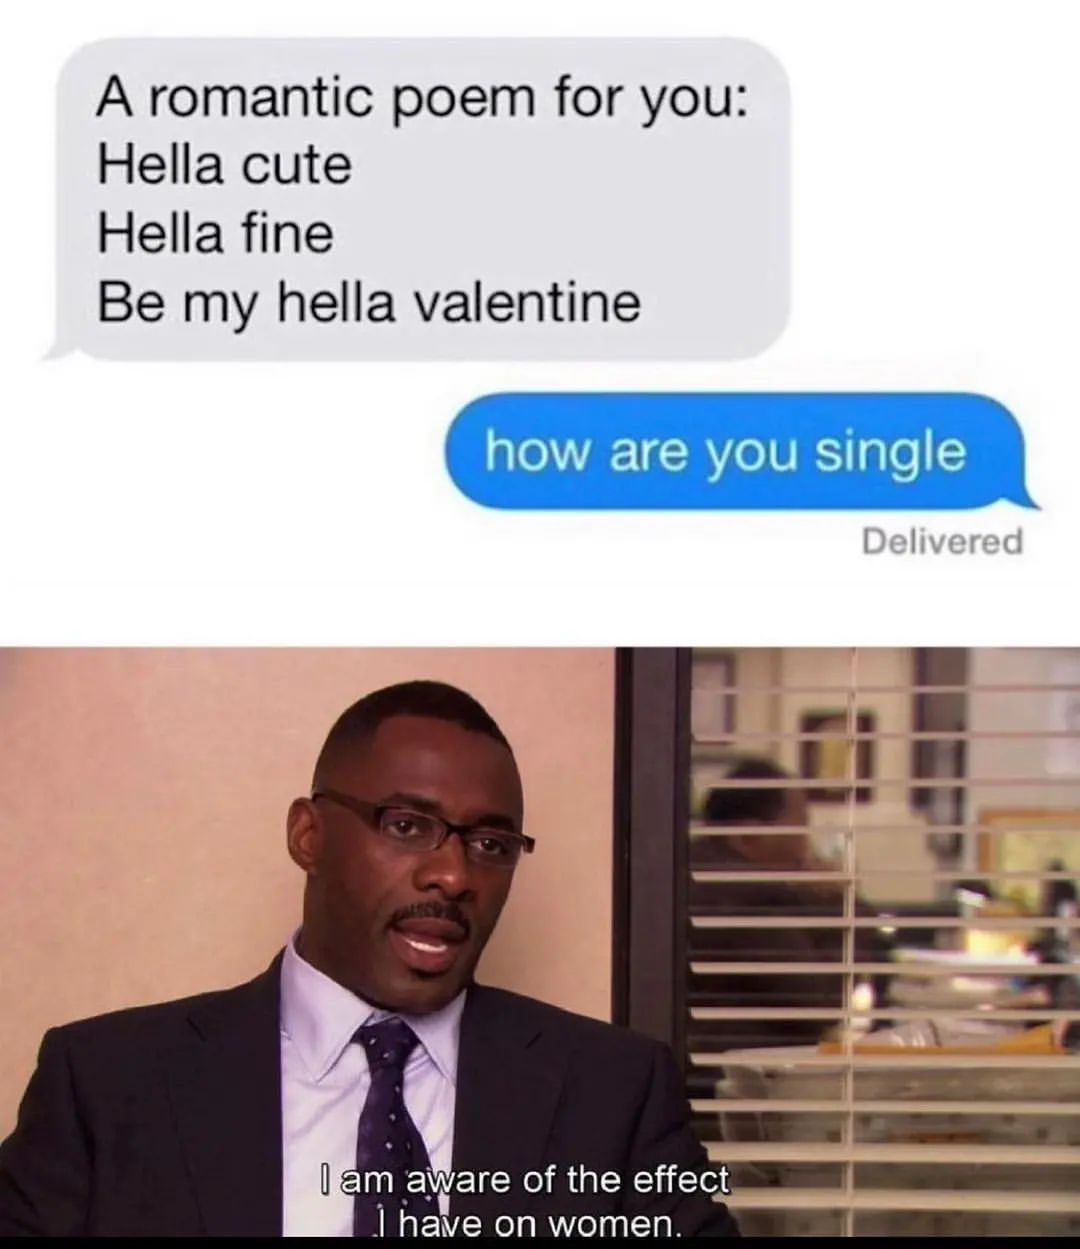 A romantic poem for you: Hella cute. Hella fine. Be my hella valentine. How are you single. I am aware of the effect I have on women.